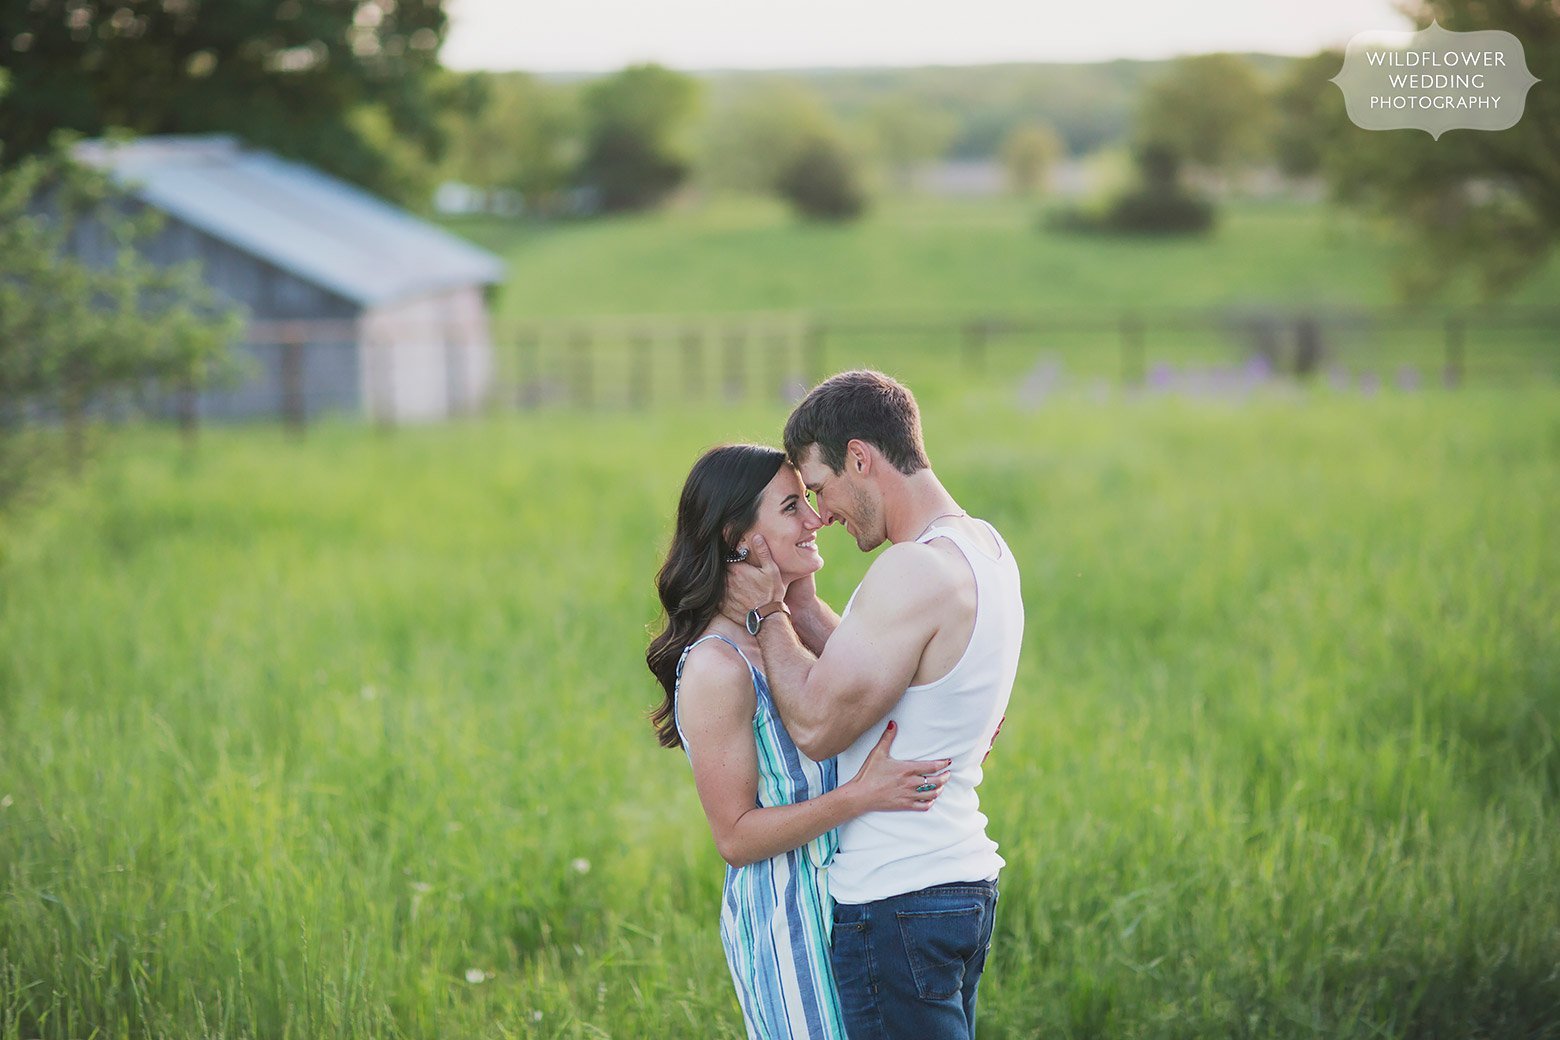 Sexy farm engagement photos with farm boy in wifebeater and girl in striped romper.